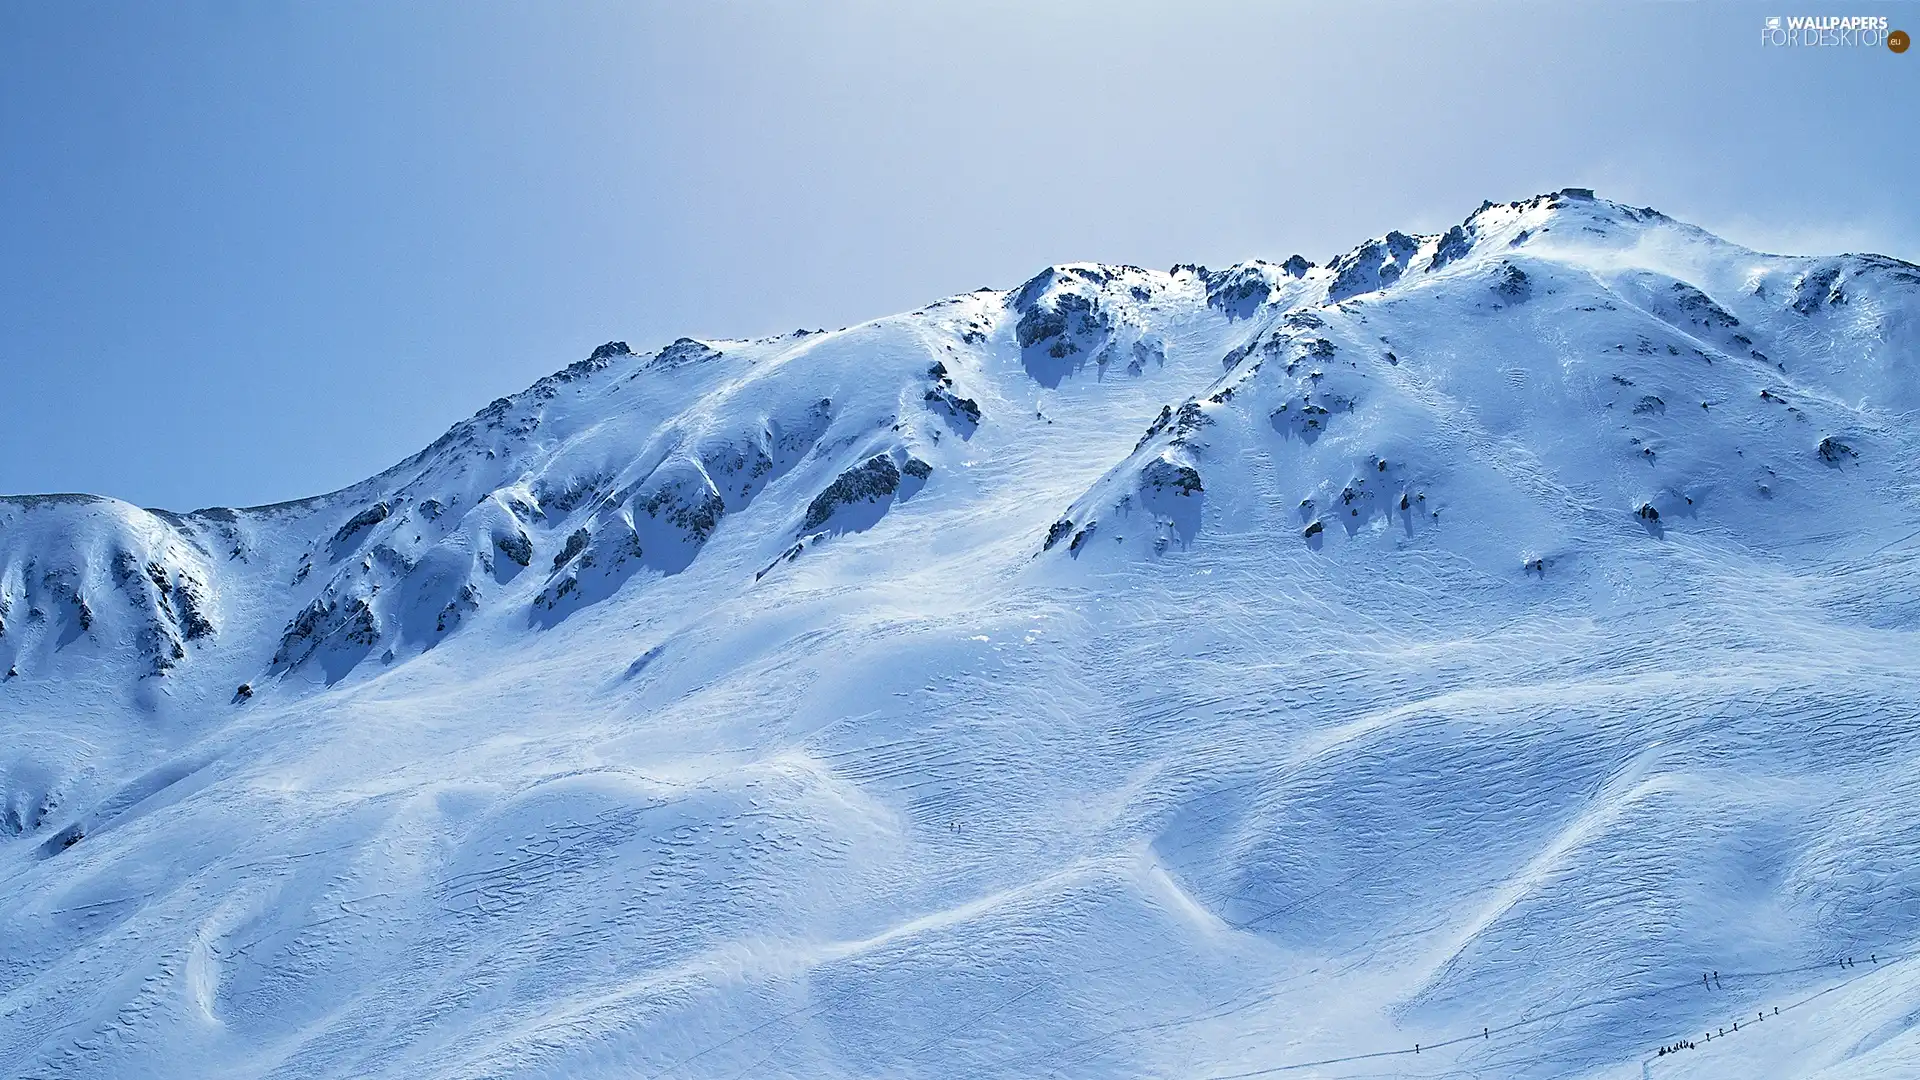 peaks, Covered, snow, mountain - For desktop wallpapers: 1920x1080